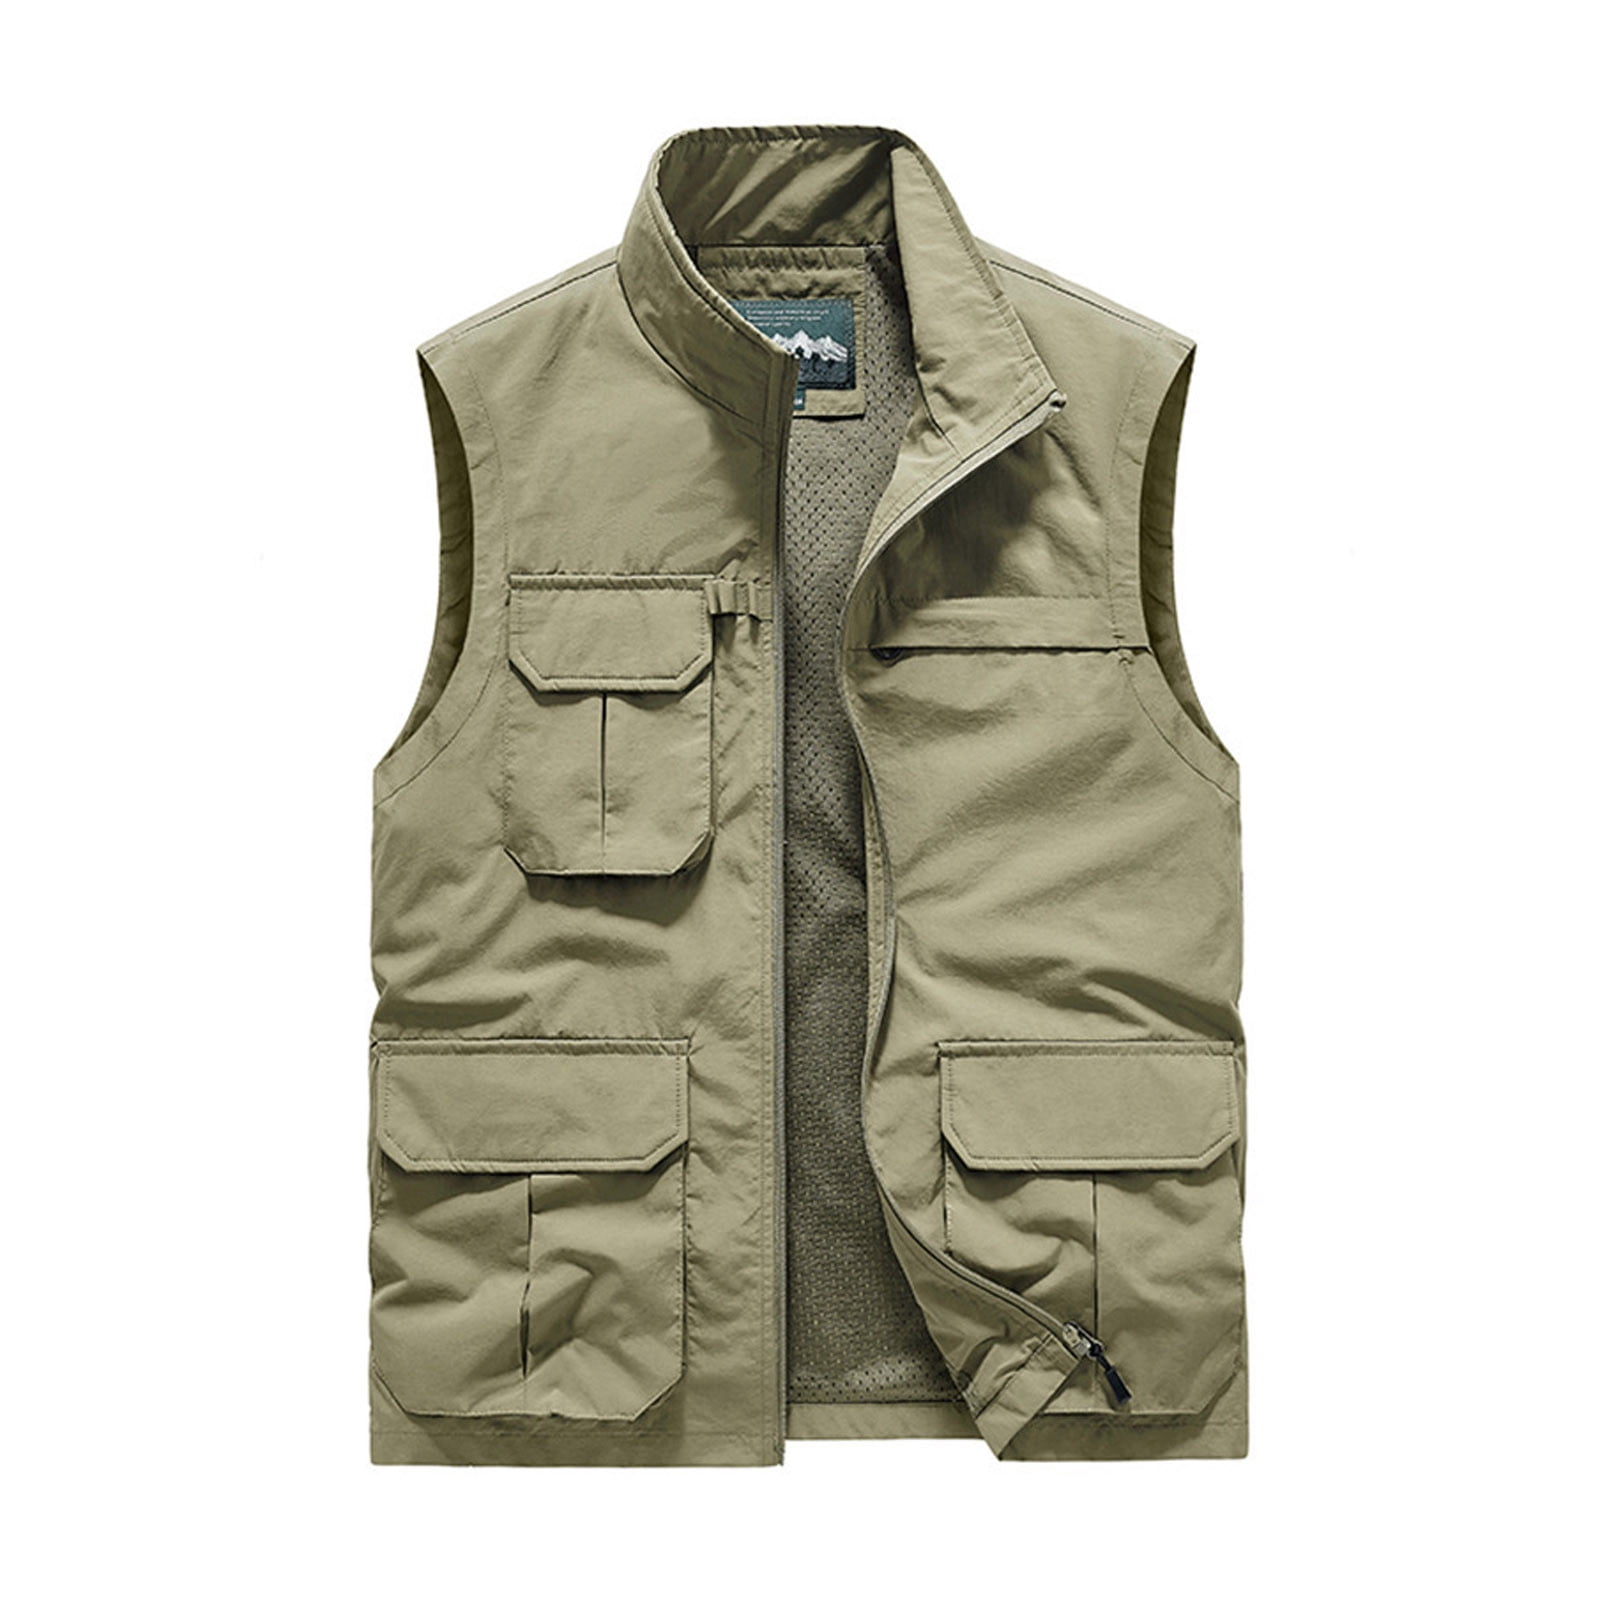 Mens Vests Outerwear Clearance Men's Casual Lightweight Outdoor Vest ...